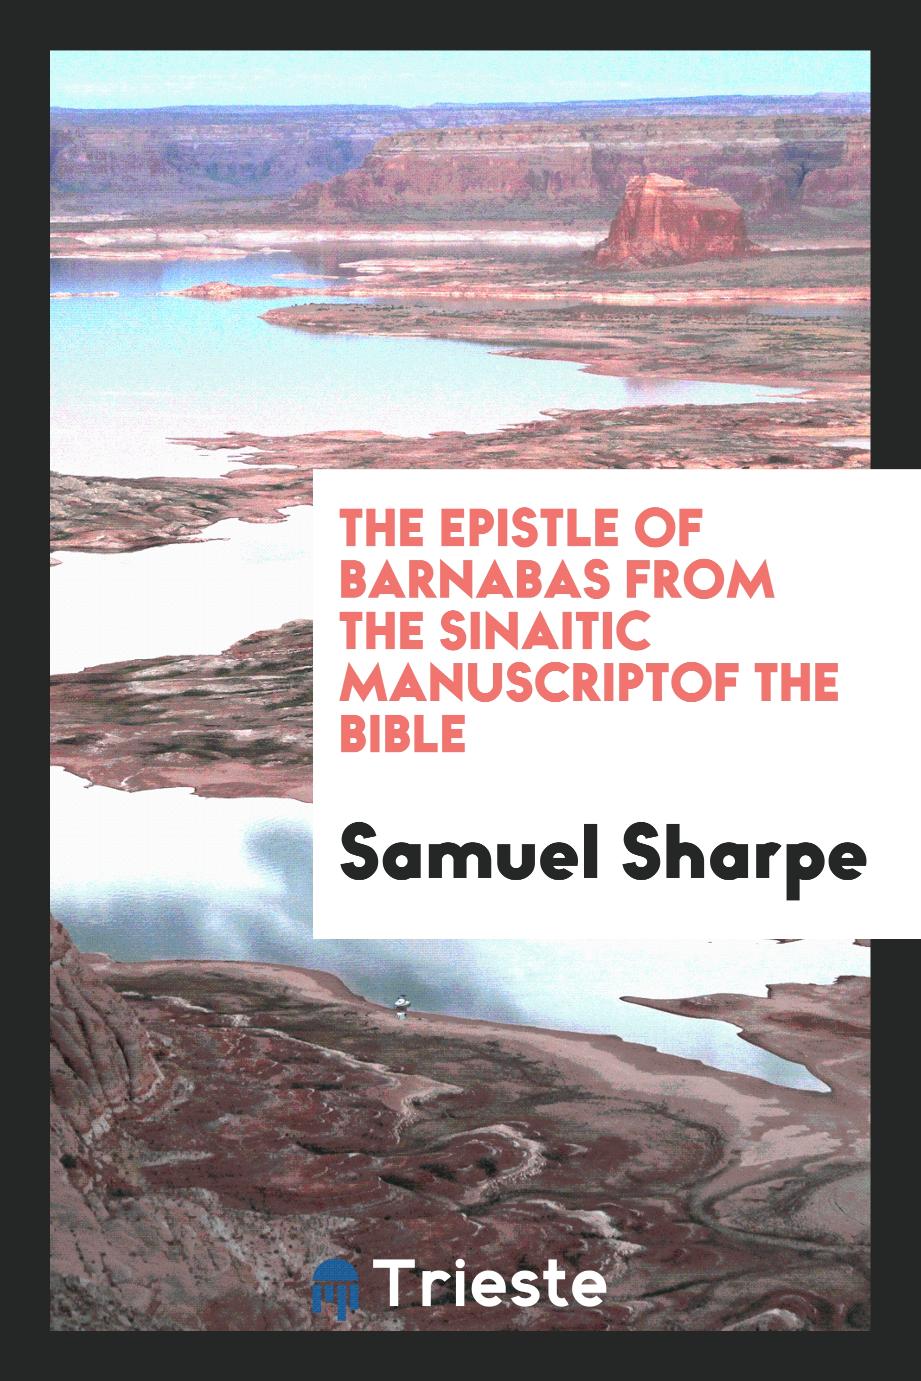 The Epistle of Barnabas from the Sinaitic Manuscriptof the Bible